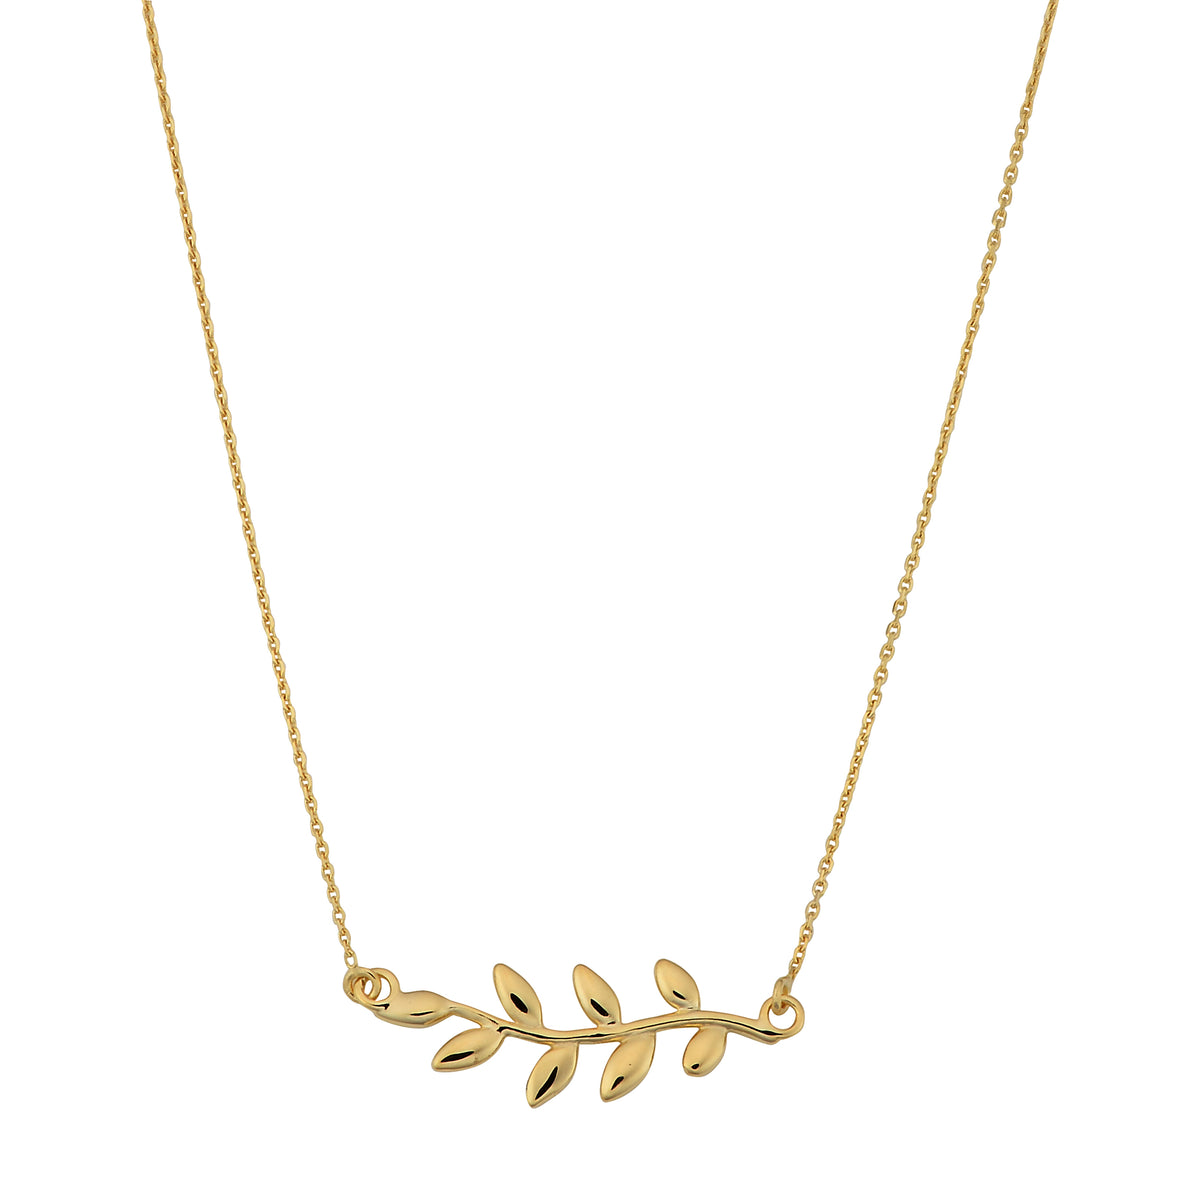 10K Yellow Gold Olive Leaf Pendant Necklace, 18" fine designer jewelry for men and women